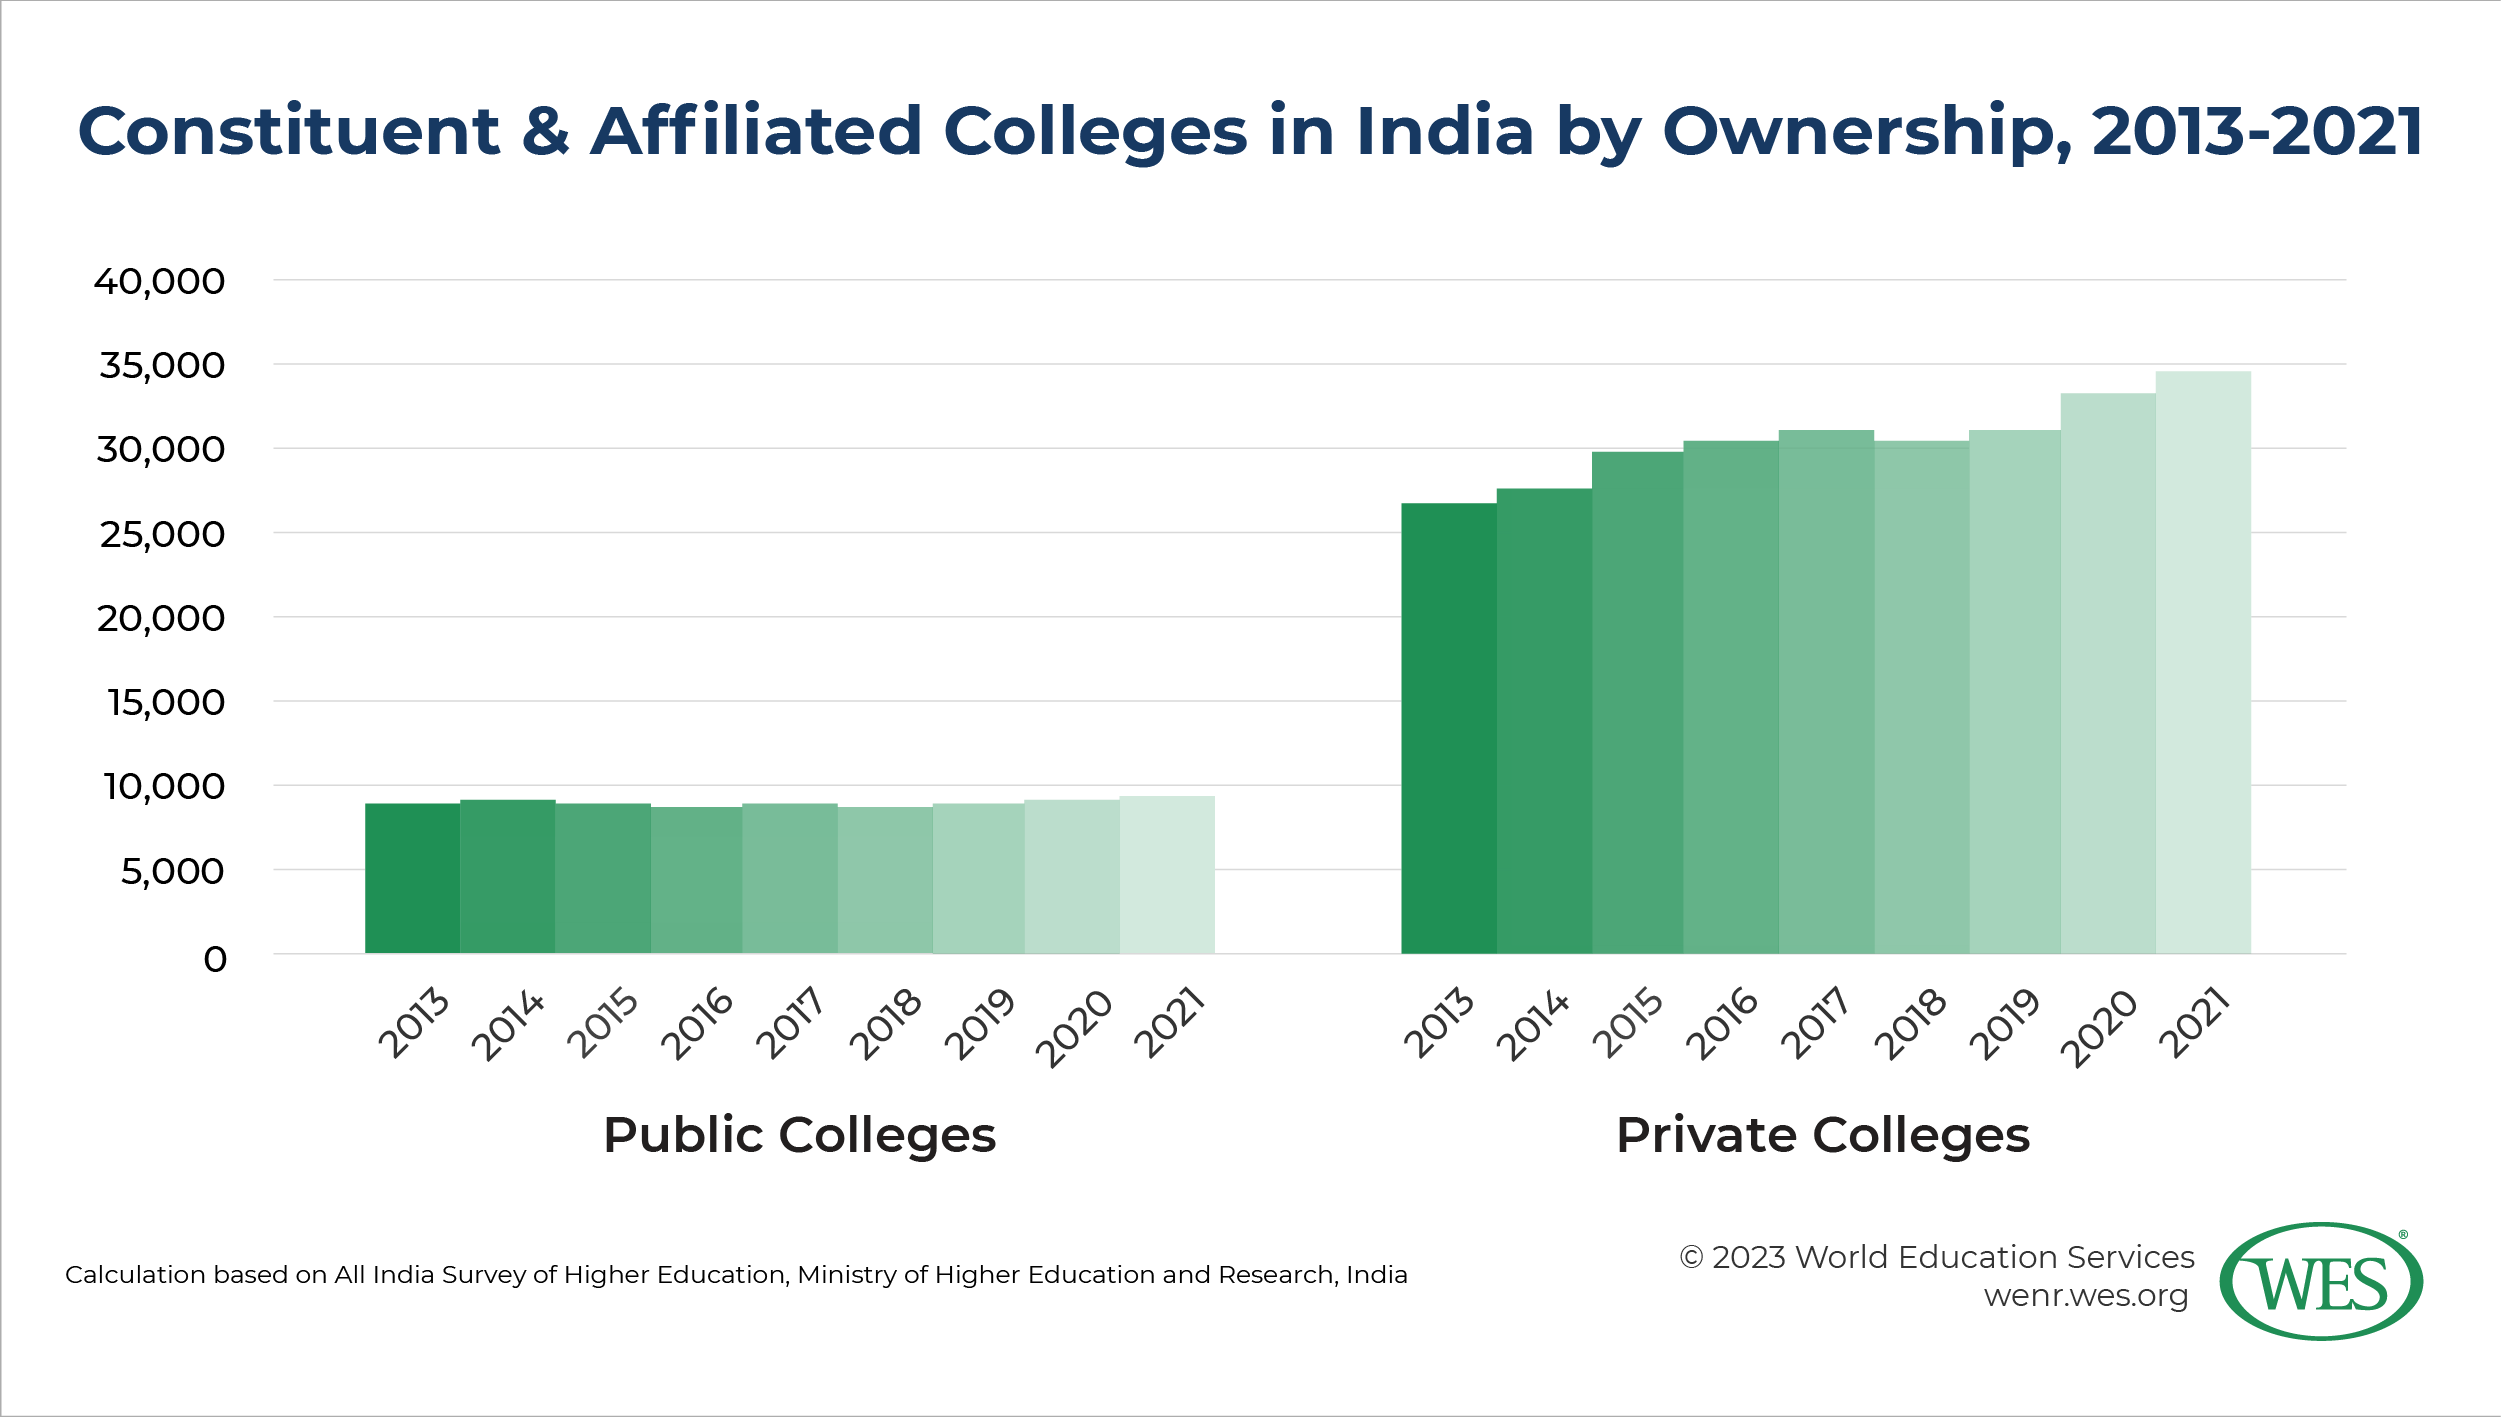 Annual number of constituent and affiliated colleges in India by ownership between 2013 and 2021.